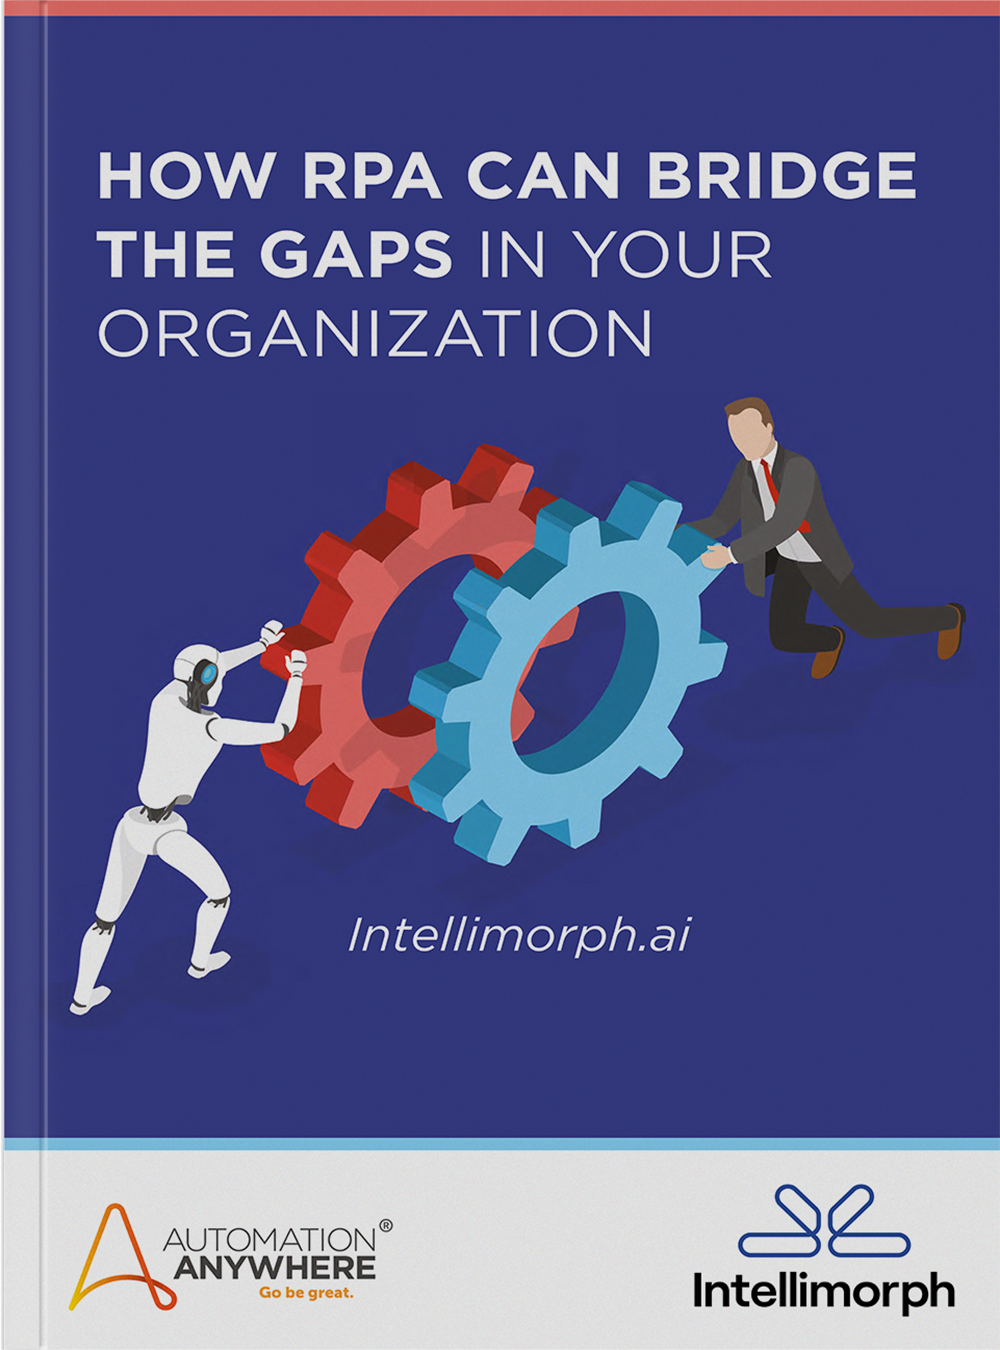 How RPA can bridge gaps in your organization